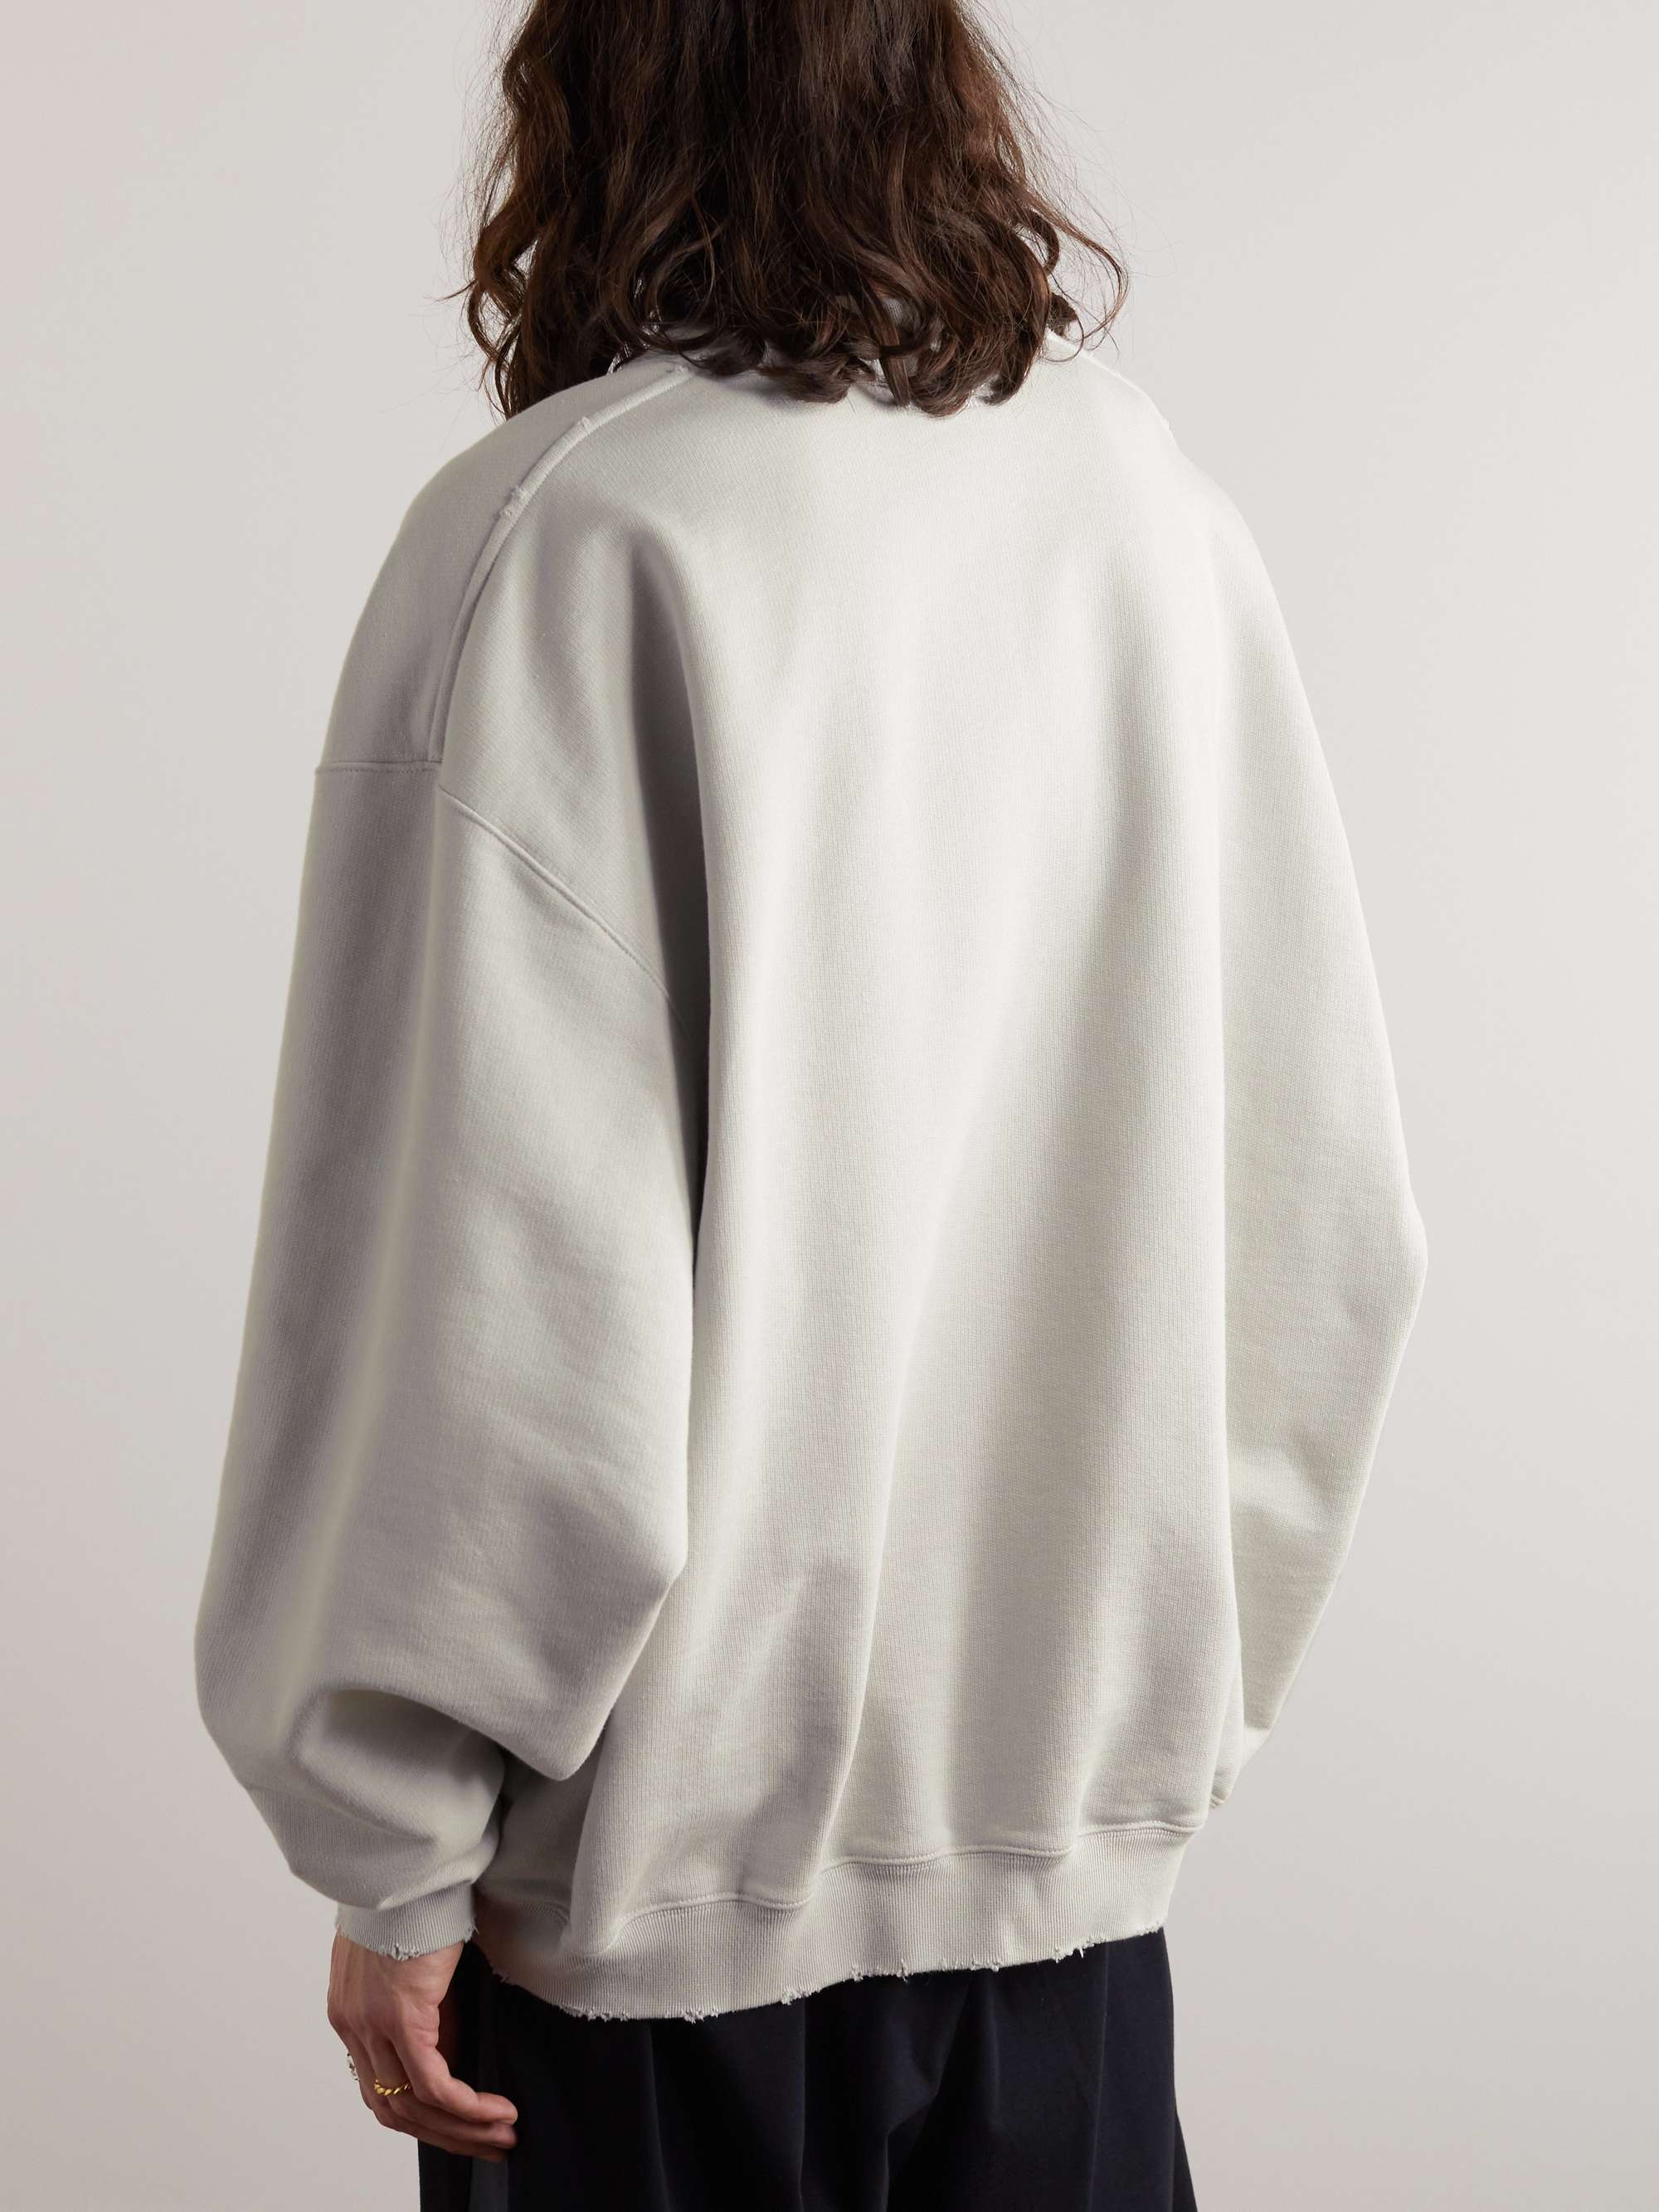 VETEMENTS Oversized Embroidered Distressed Cotton-Blend Jersey Sweatshirt